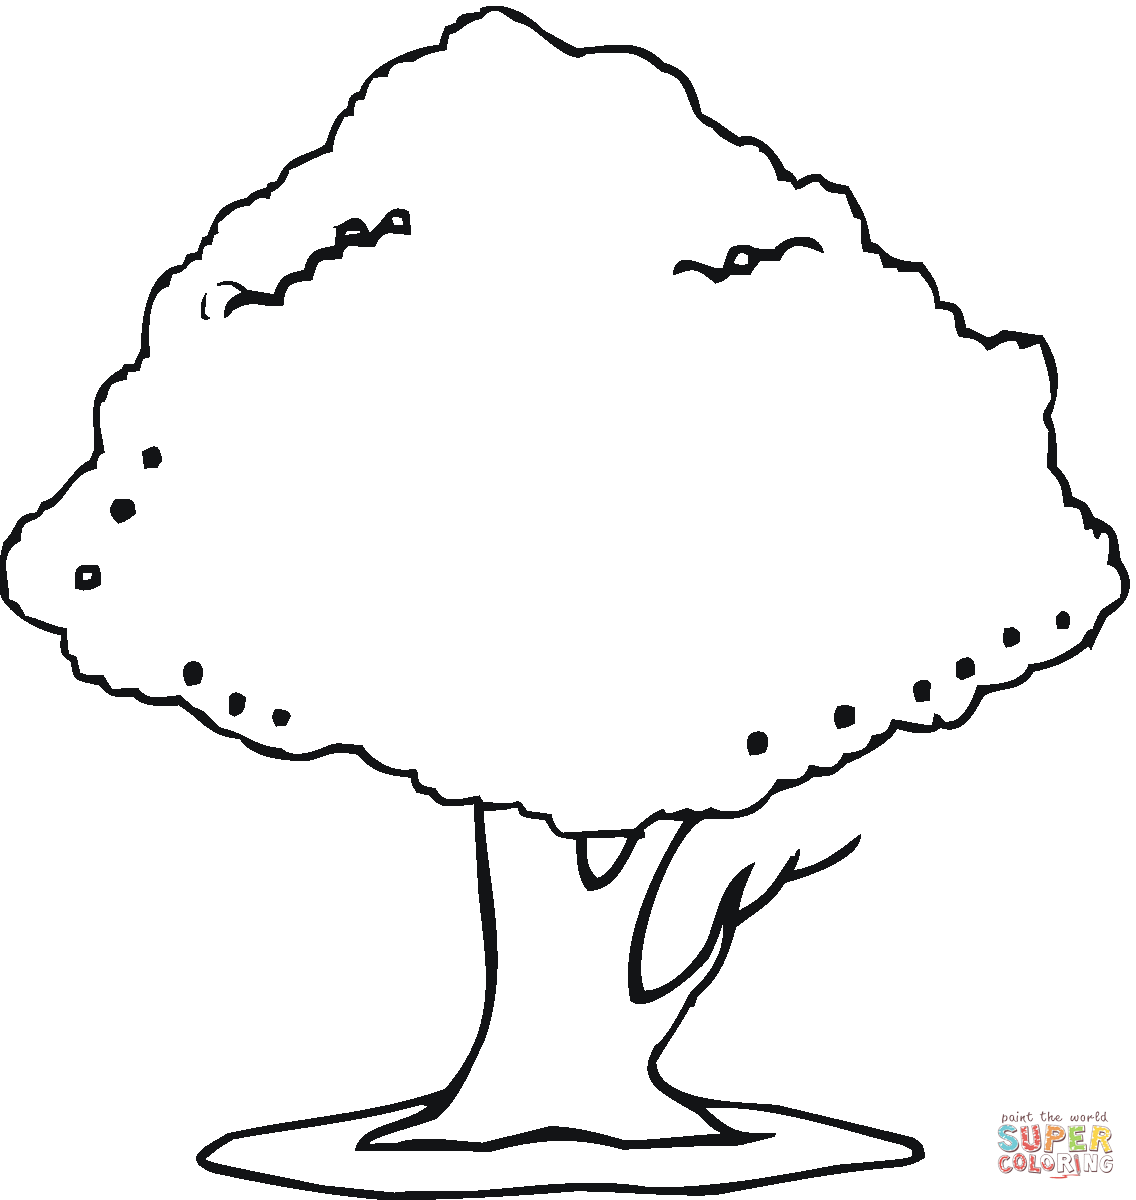 Cherry Tree coloring #8, Download drawings